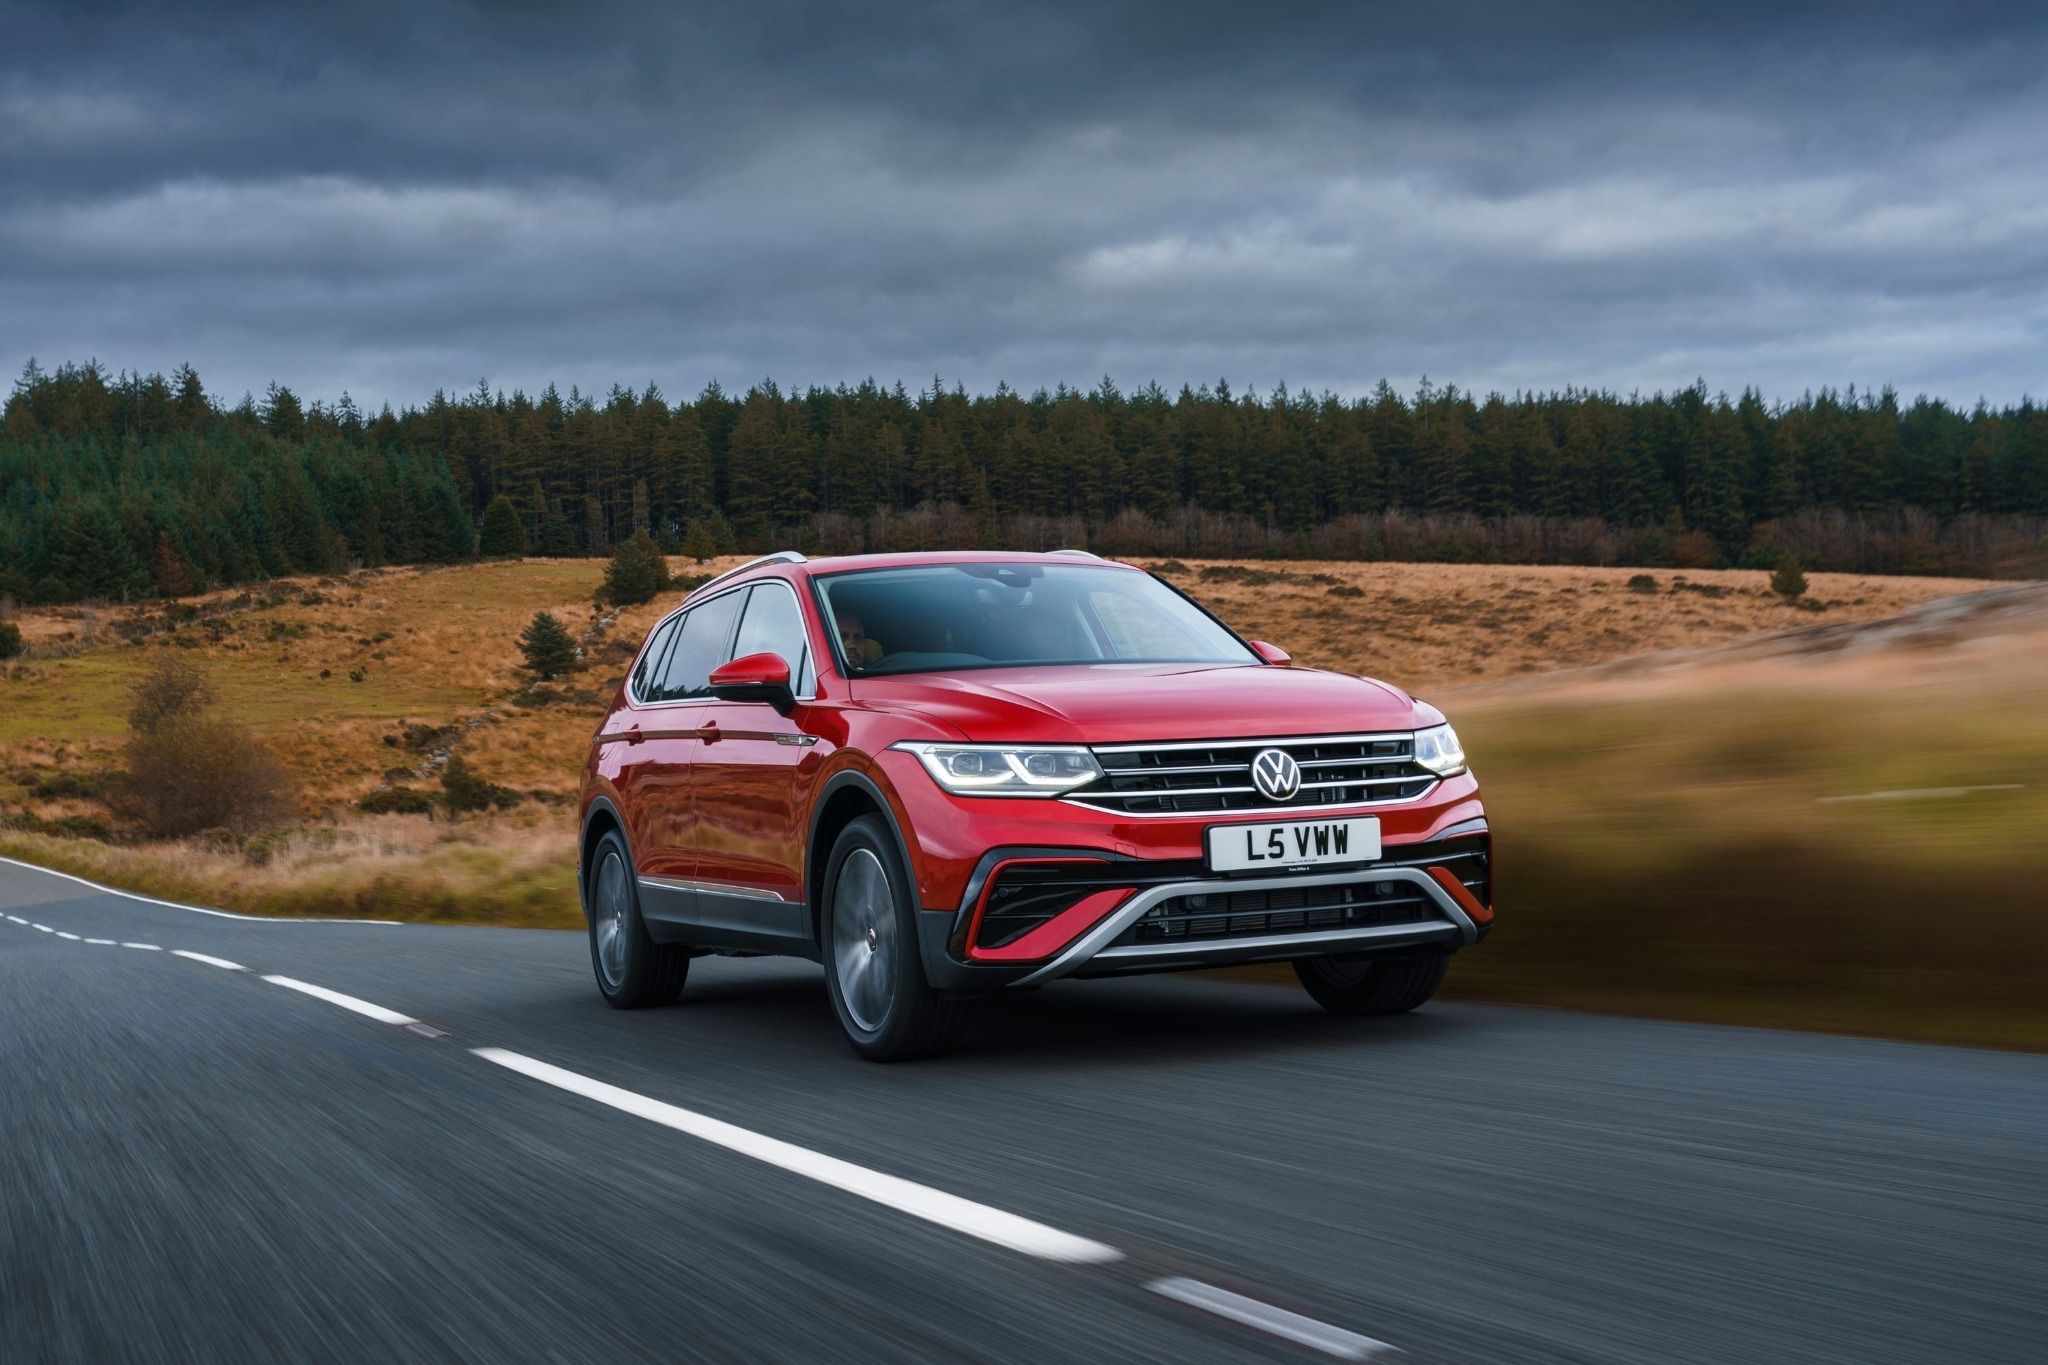 Front view of red Volkswagen Tiguan Allspace driving on a road